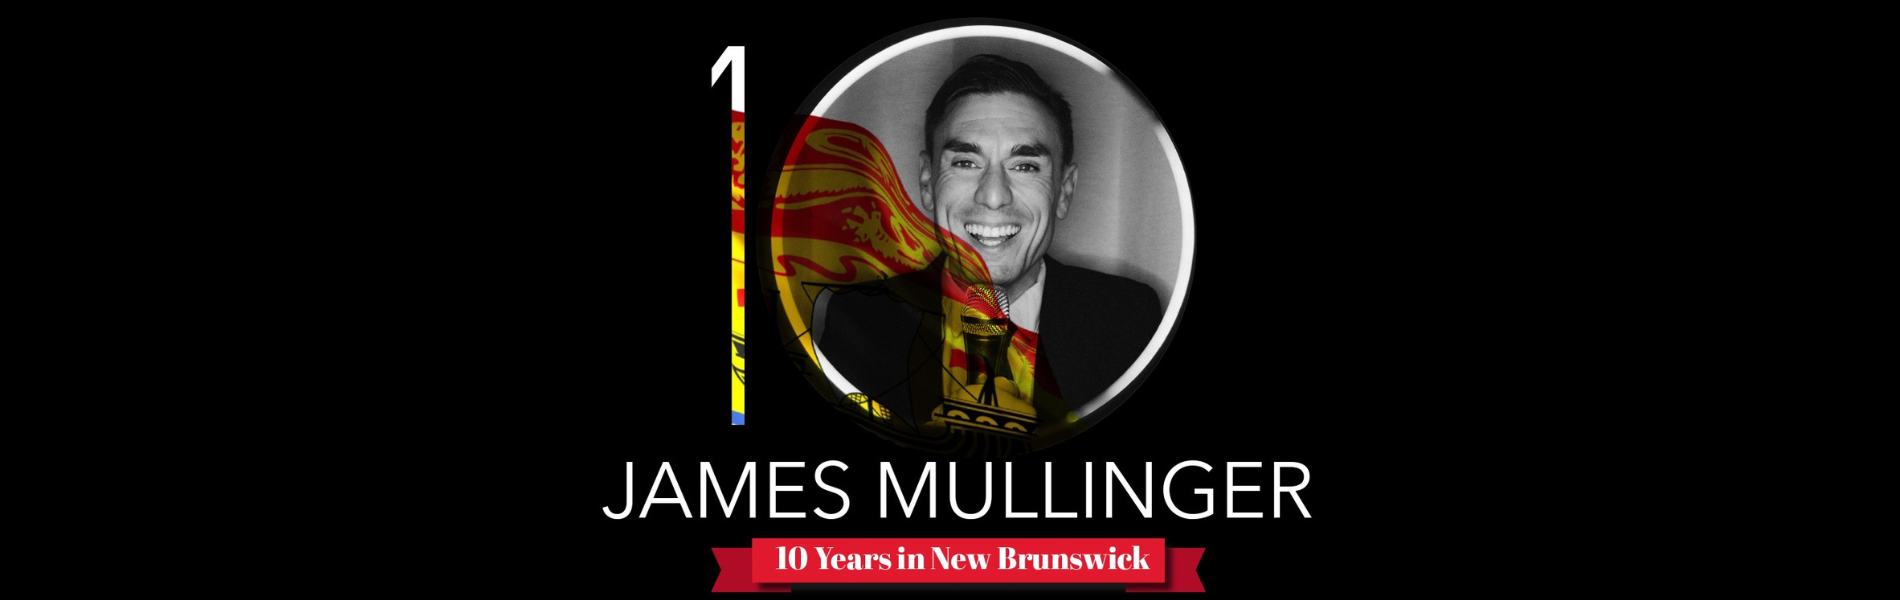 A photo of James Mullinger with the number 10 and an NB flag superimposed over his face.